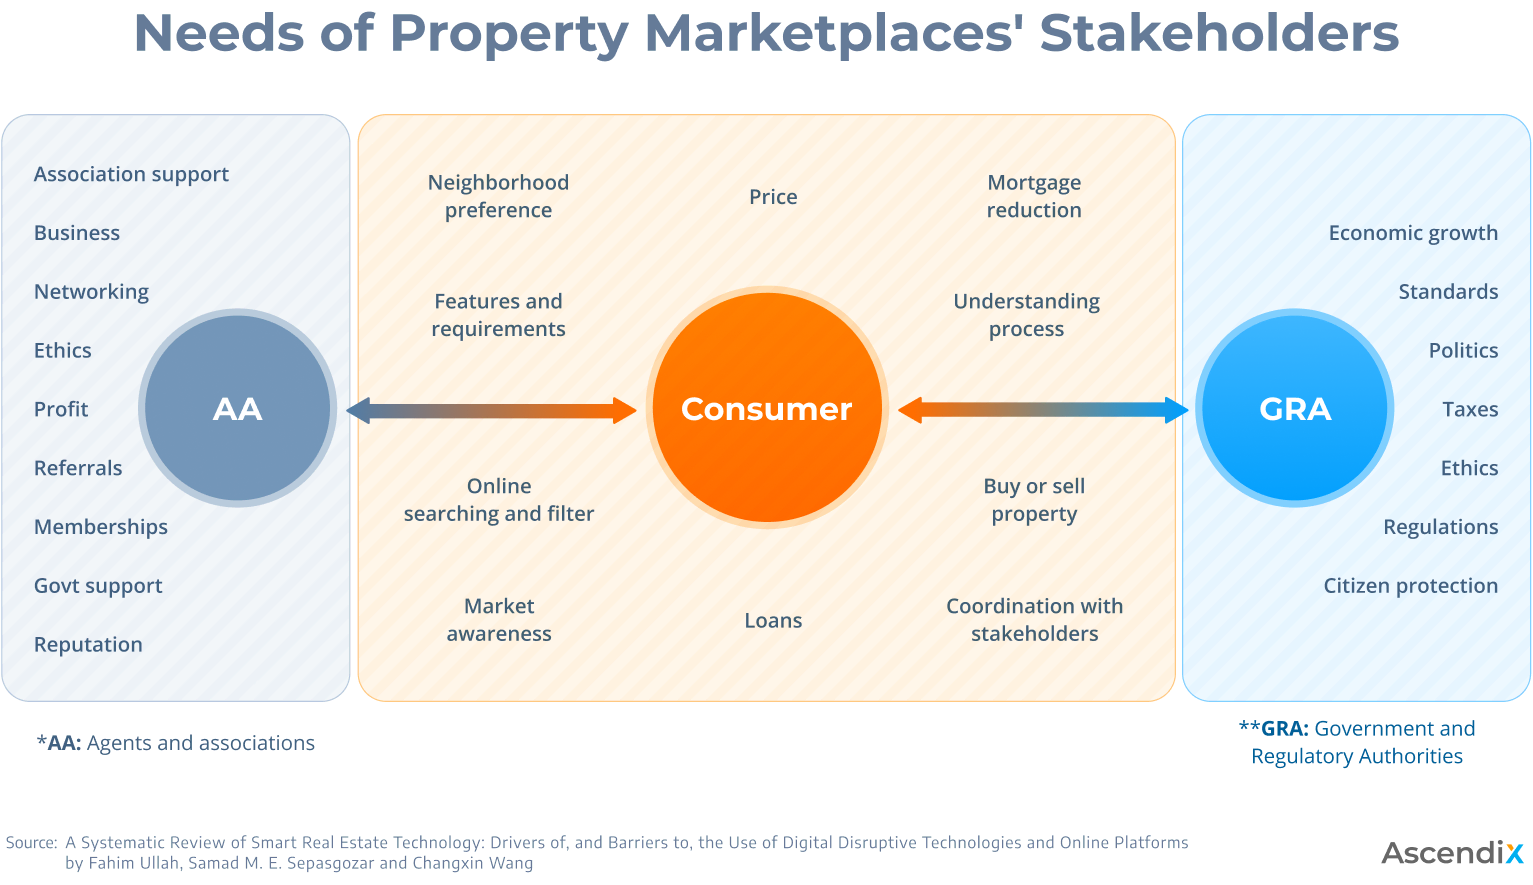 05_Needs of Property Marketplaces Stakeholders